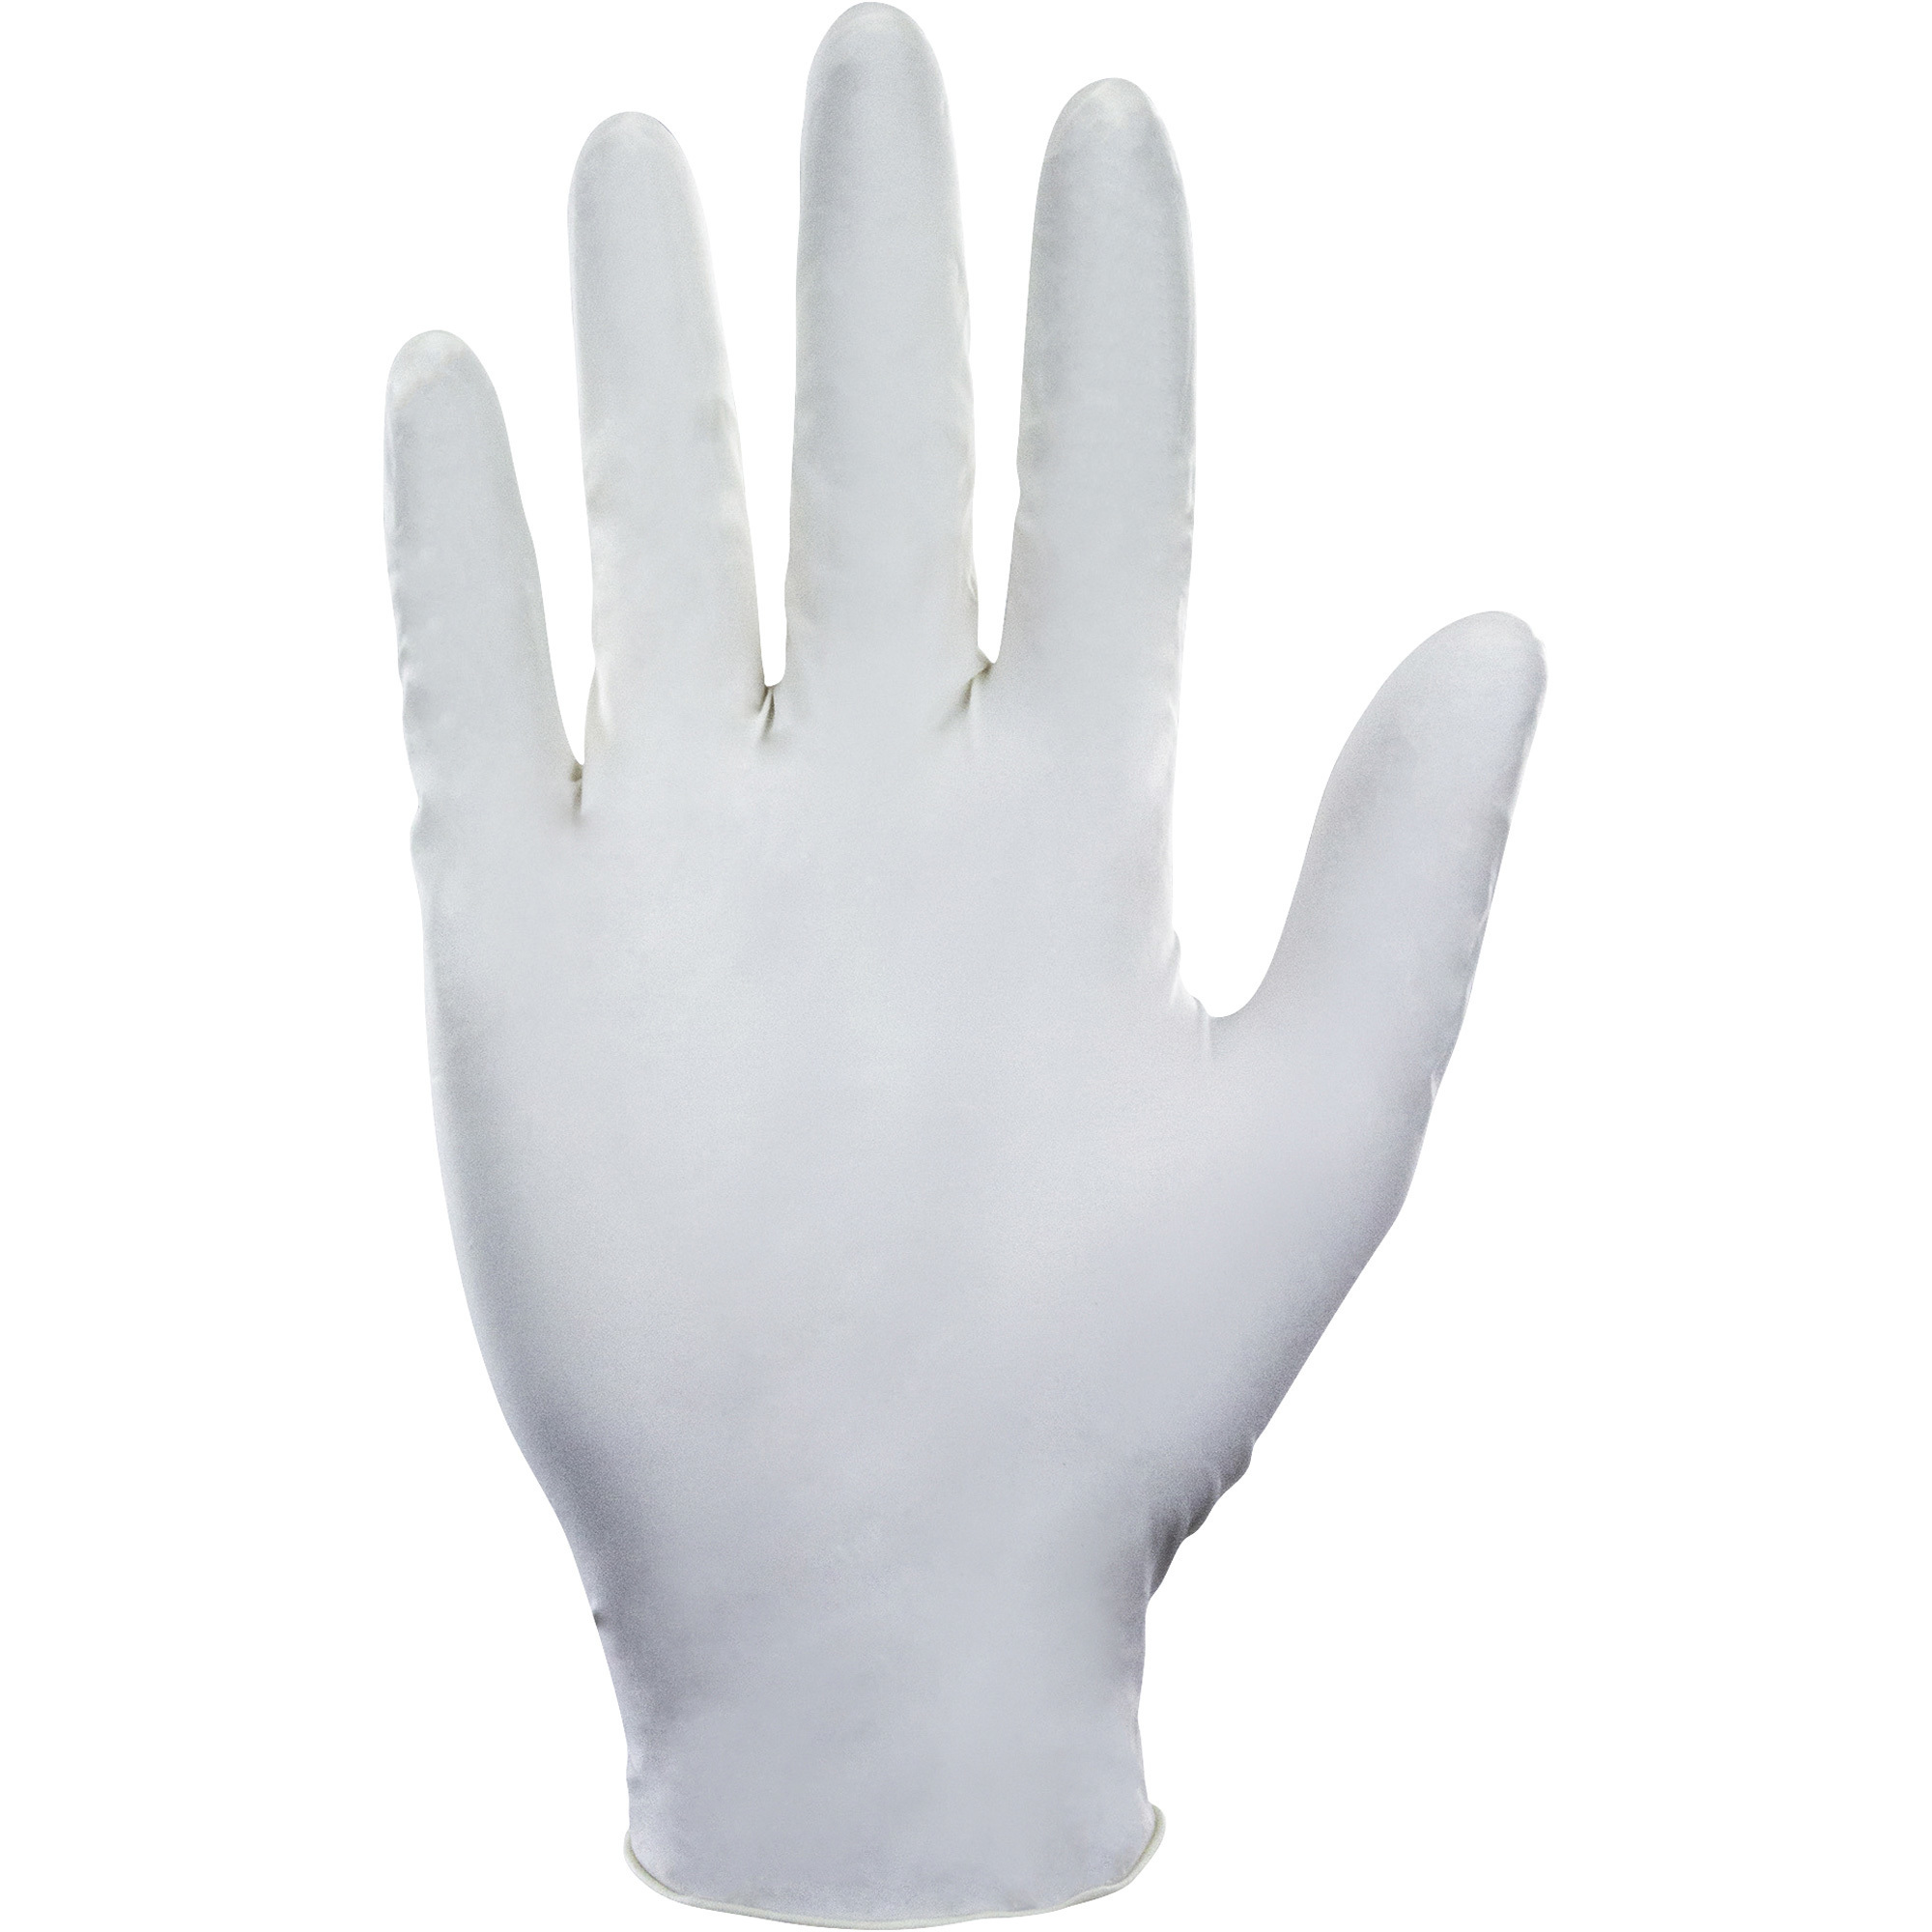 SAS Value-Touch 5 Mil Latex Disposable Gloves, 50 Pairs, White, Large, Model 6593-20